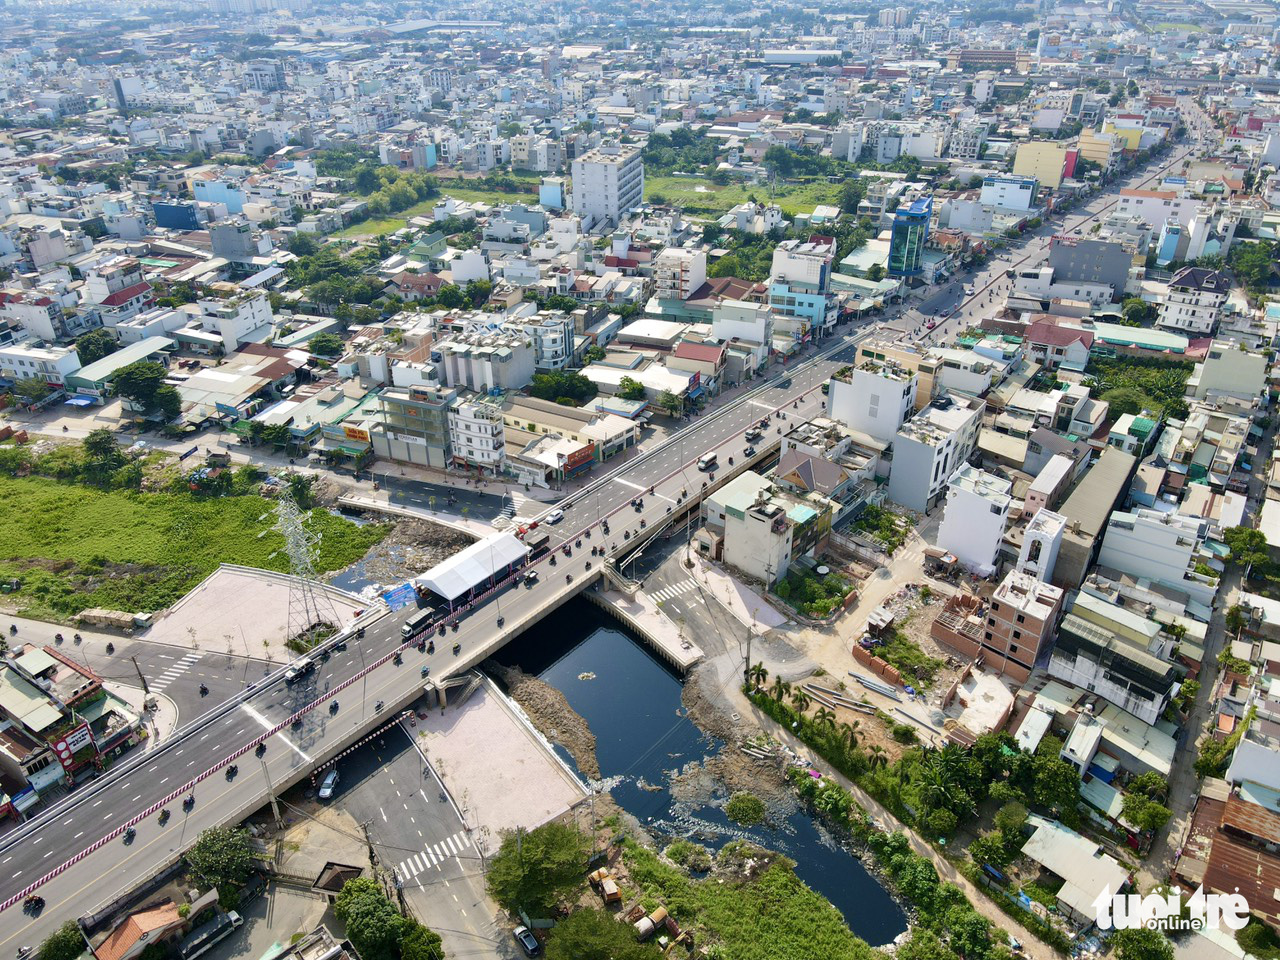 A bird’s-eye view of the Bung Bridge connecting Binh Tan District and Tan Phu District in Ho Chi Minh City, October 16, 2022. Photo: T.T.D. / Tuoi Tre